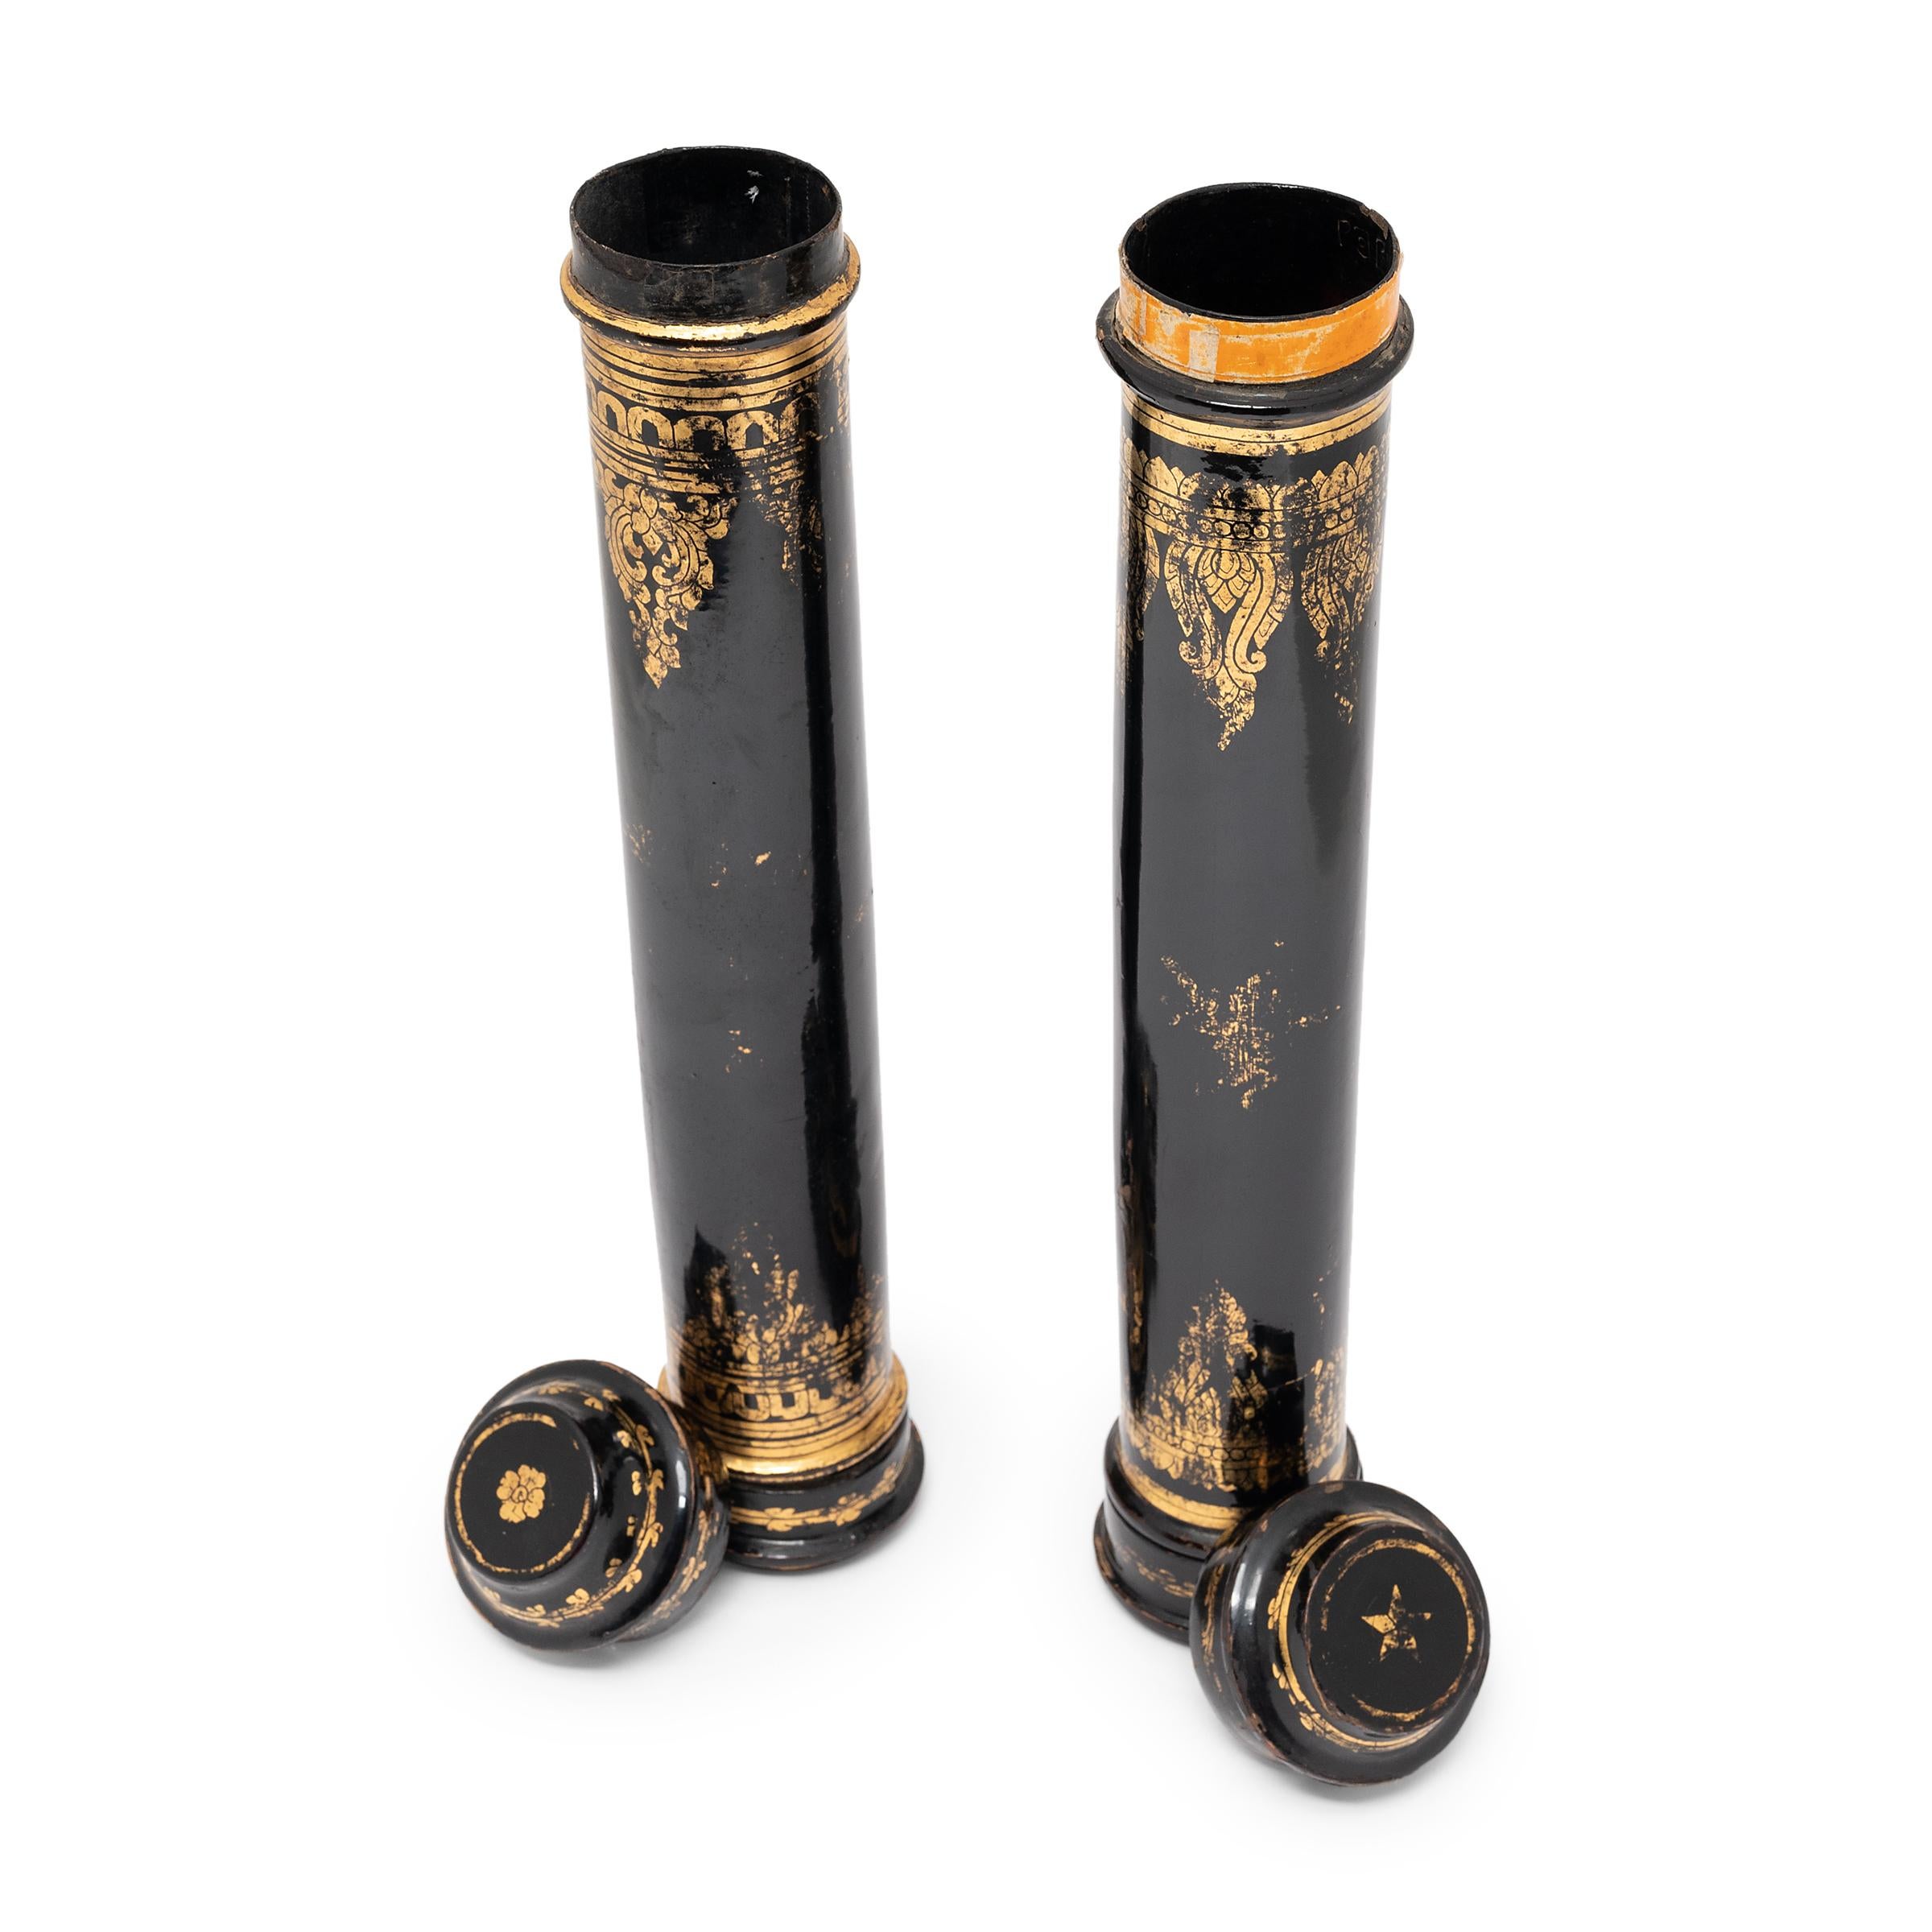 Made of bamboo and delicately lacquered in gold and black these early 20th century Thai scroll cases were an essential accessory for any esteemed scholar. The perfect size for a rolled-up scroll, the cases were once used to store and protect works